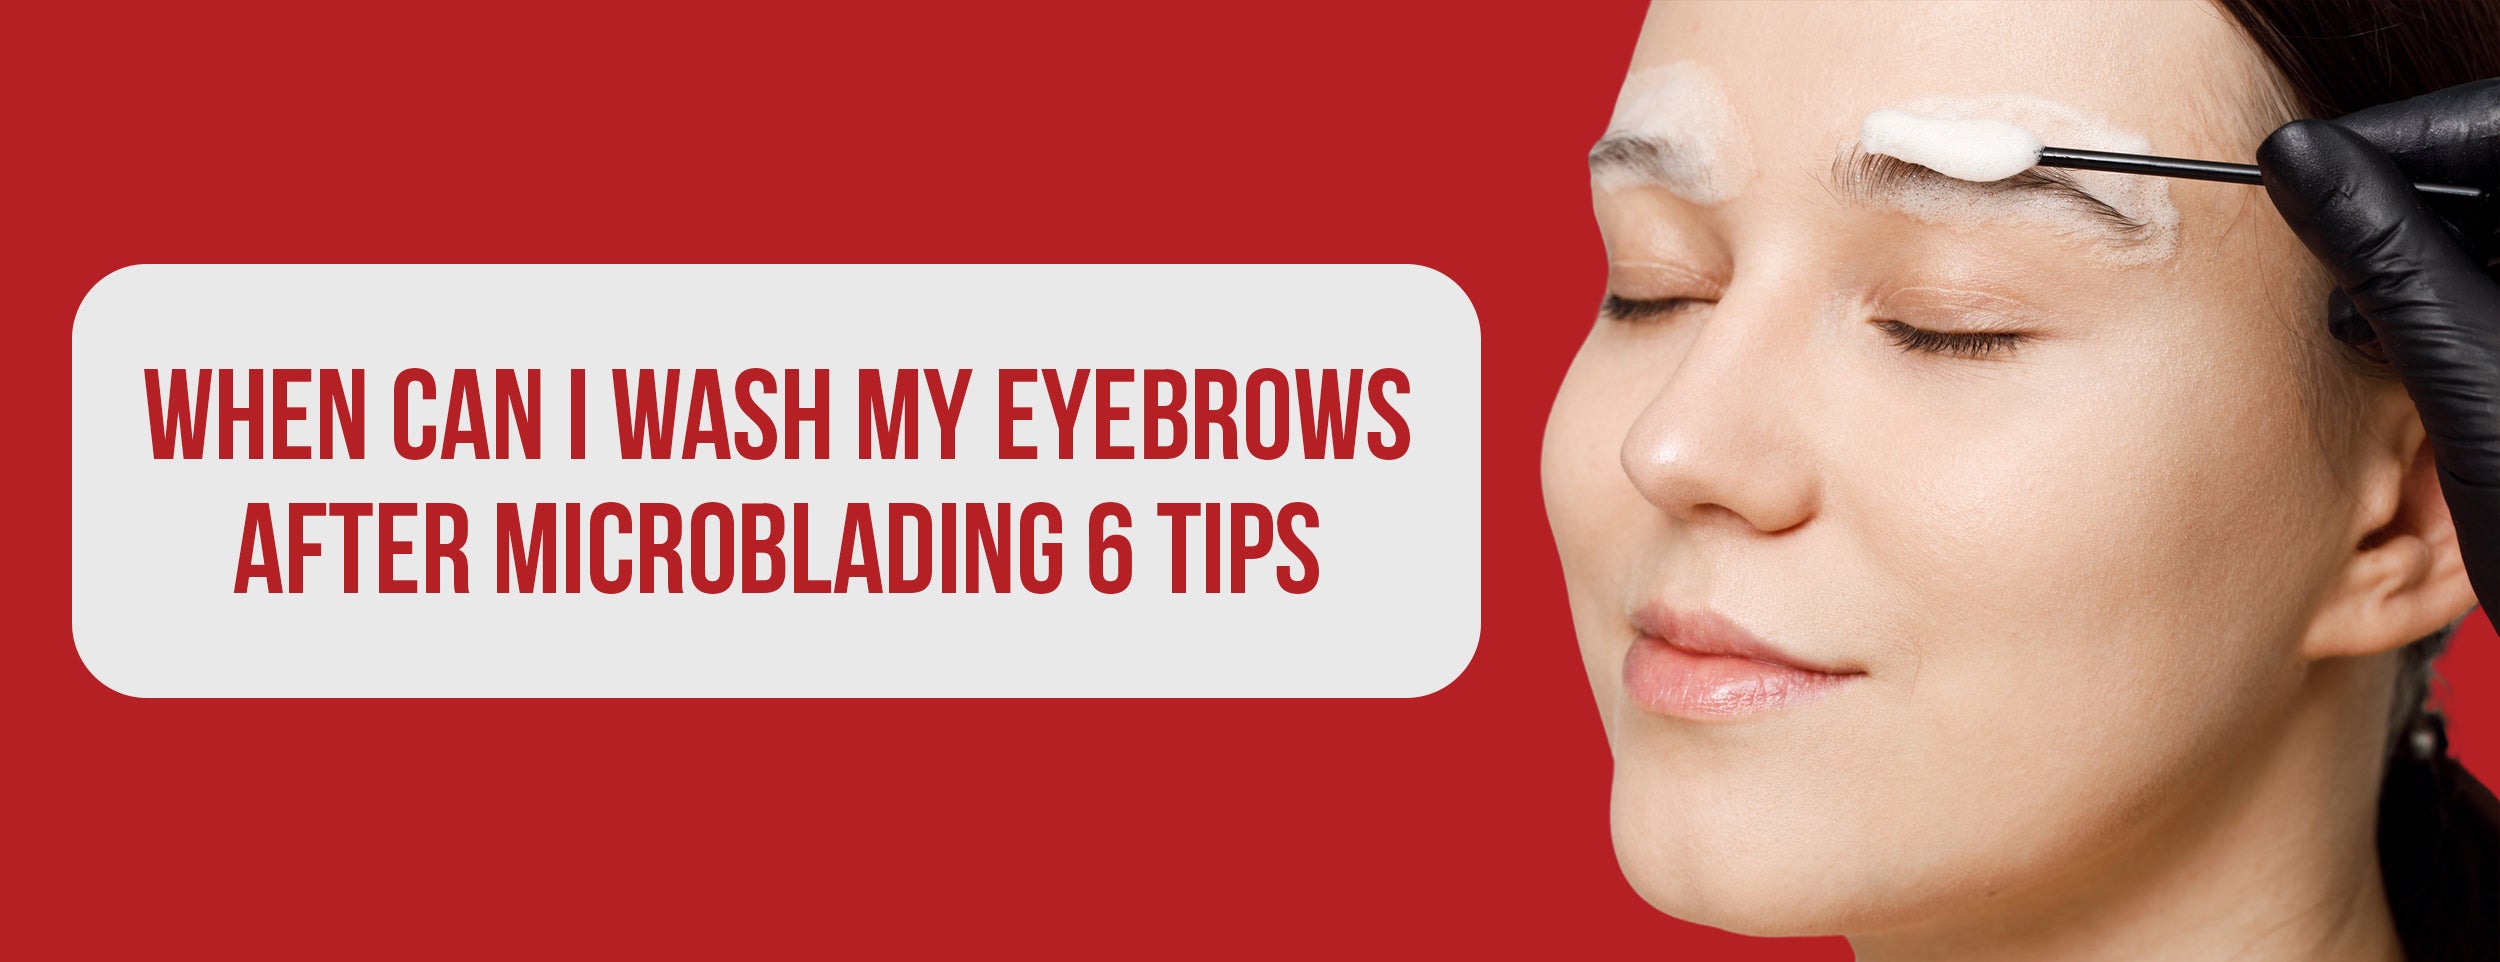 Tips for Washing Your Eyebrows After Microblading